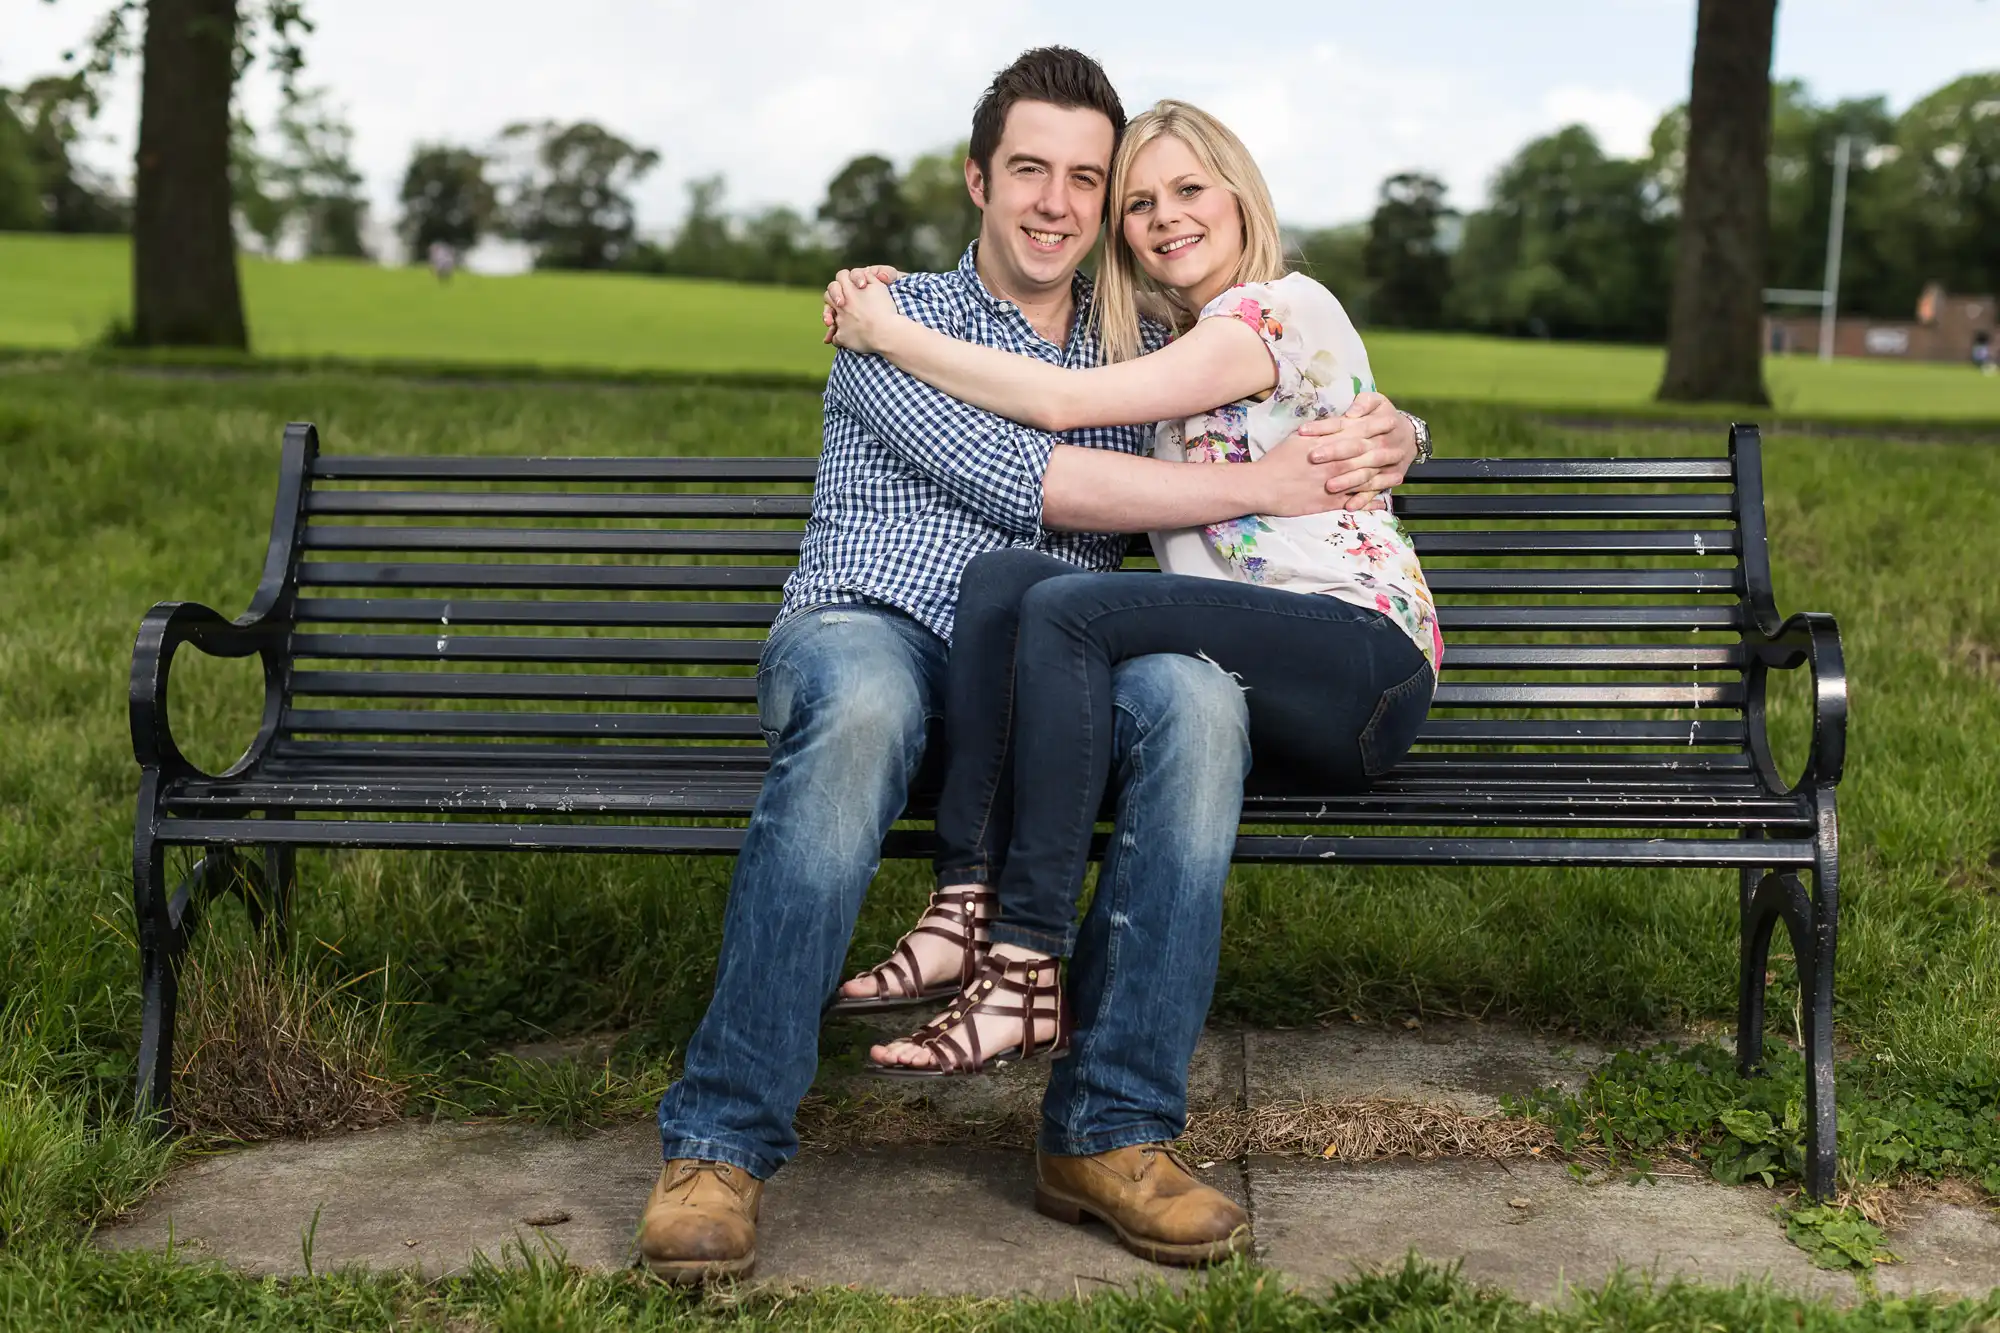 A young couple smiling and embracing on a park bench in a grassy area.